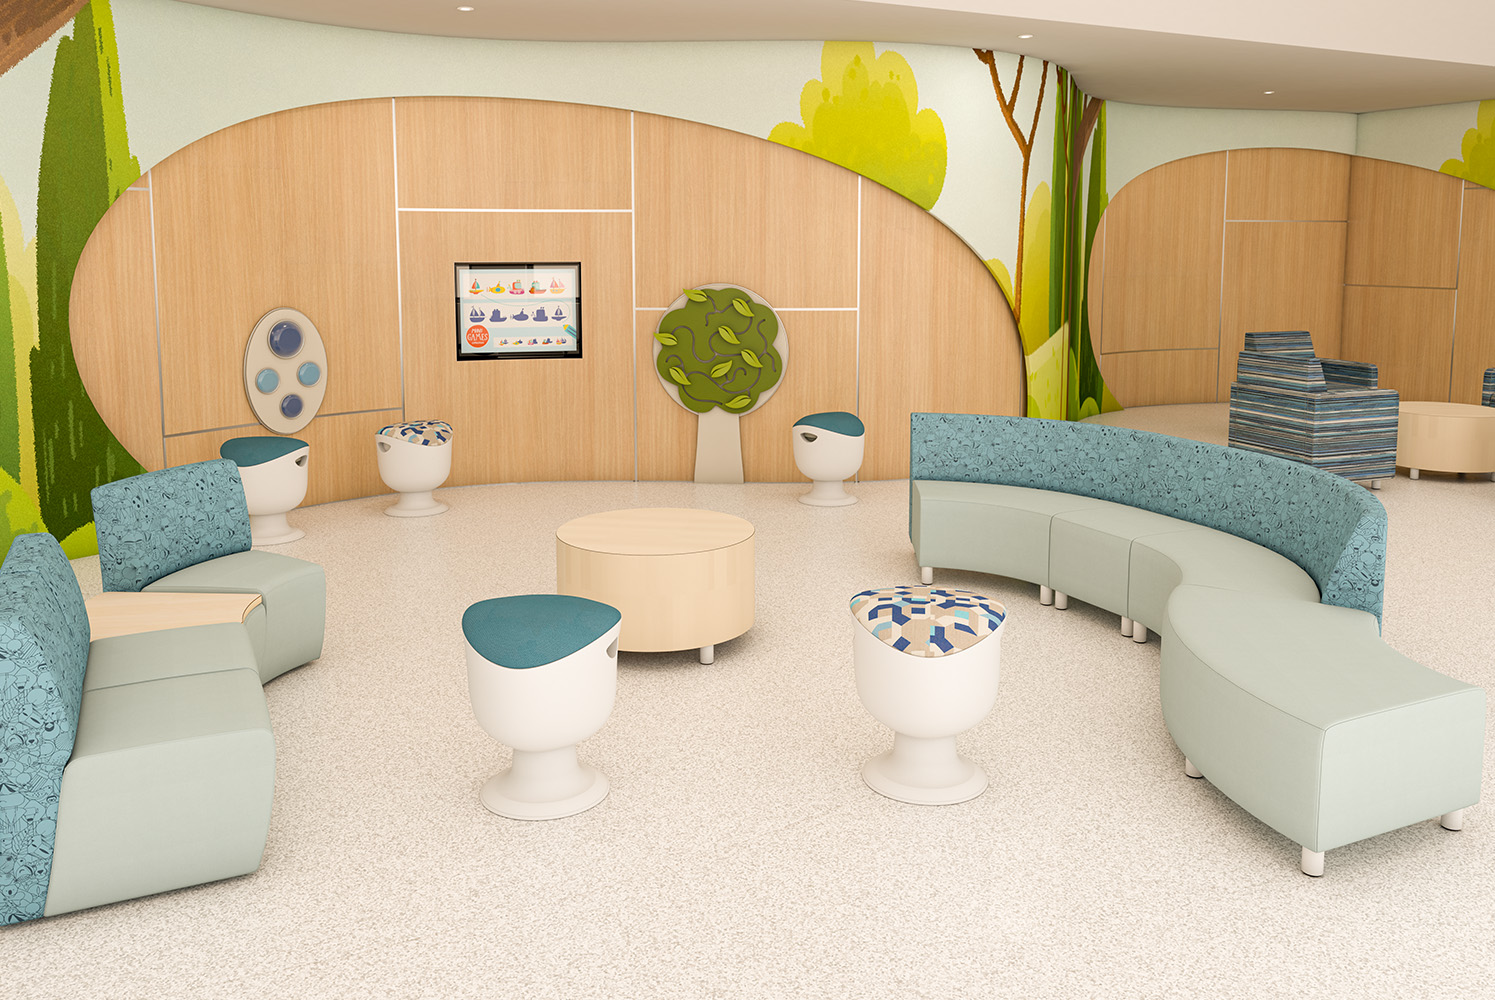 Raven Jr, Brighton Jr, Tommy and Cabana Healthcare Configuration